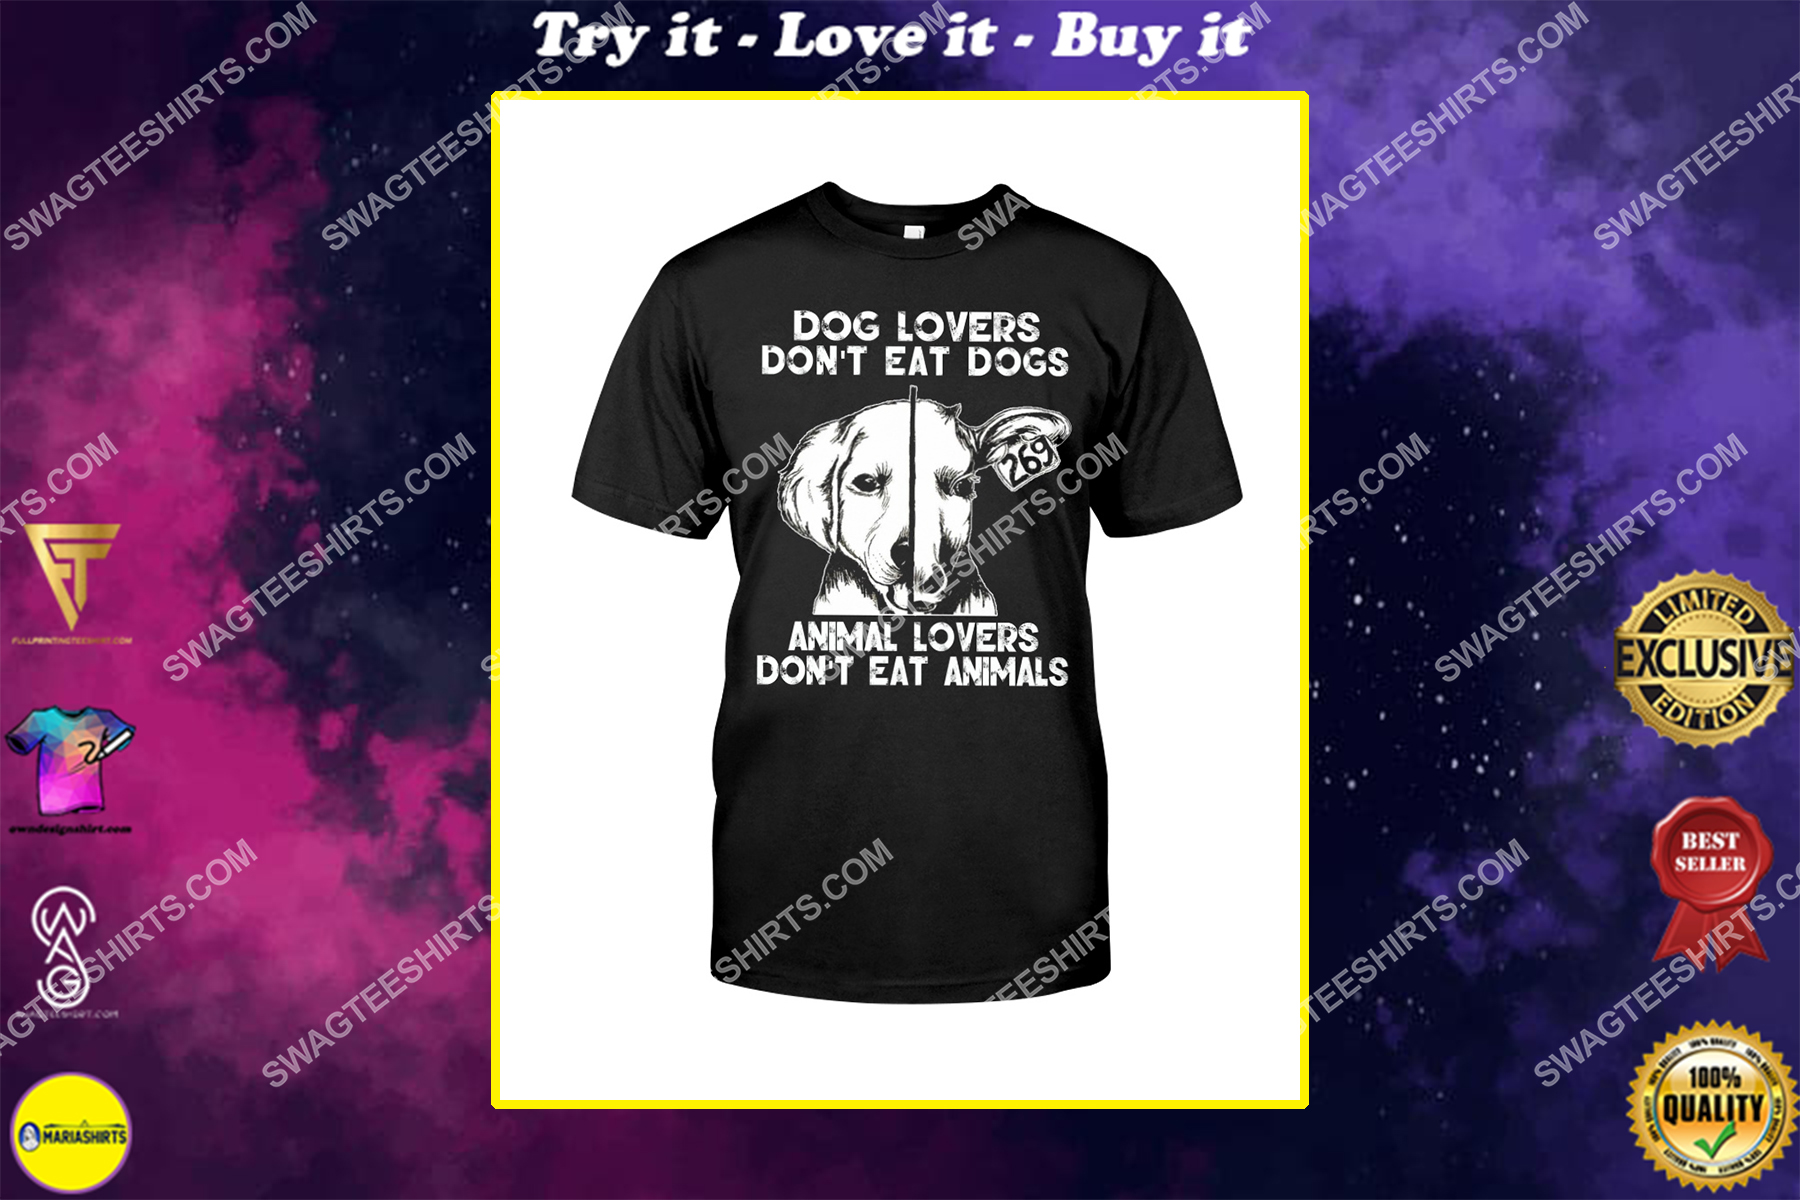 dog lovers don't eat dogs animal lovers don't eat animals save animals shirt